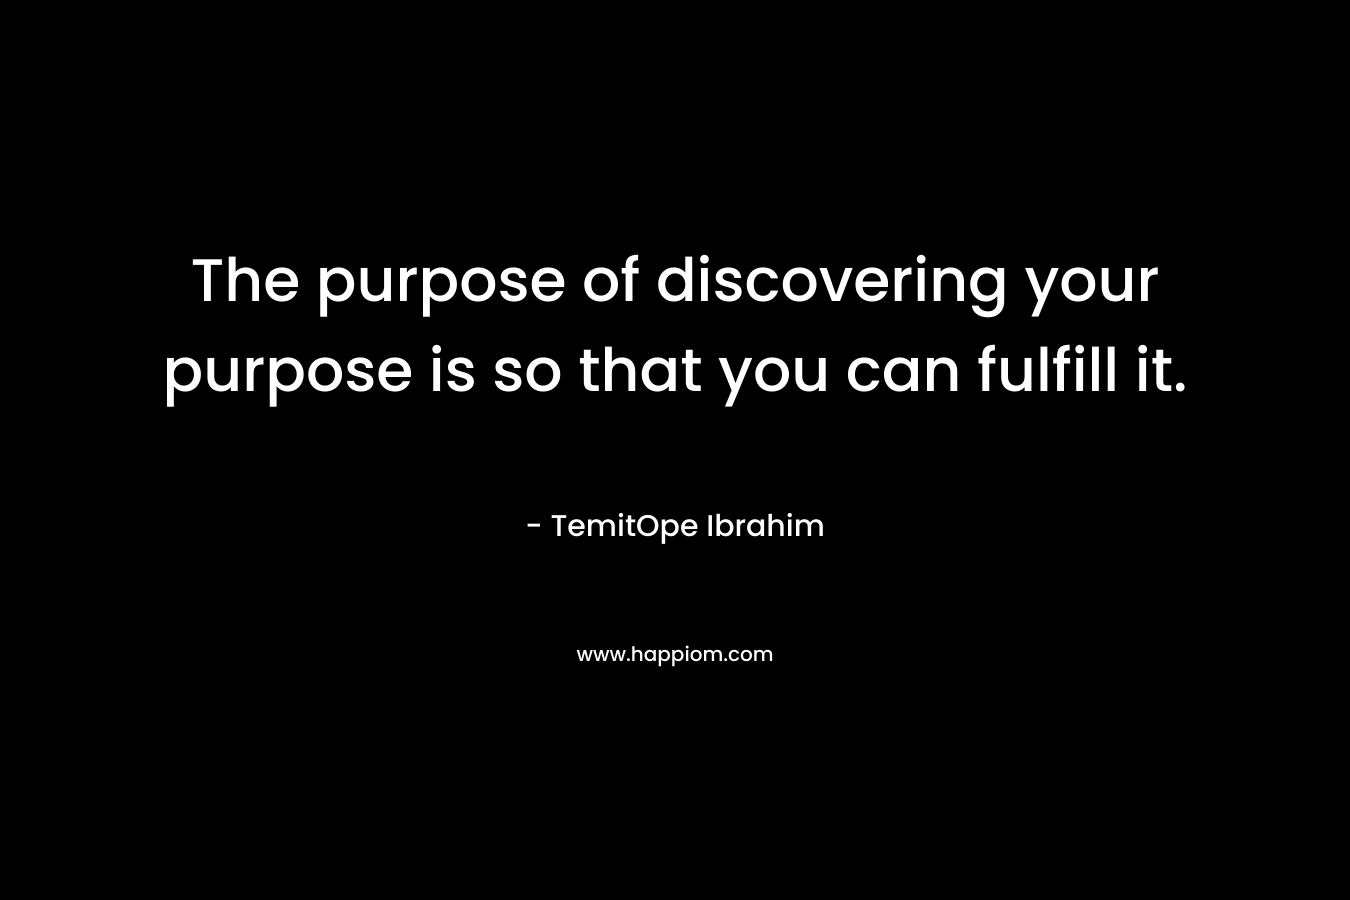 The purpose of discovering your purpose is so that you can fulfill it.